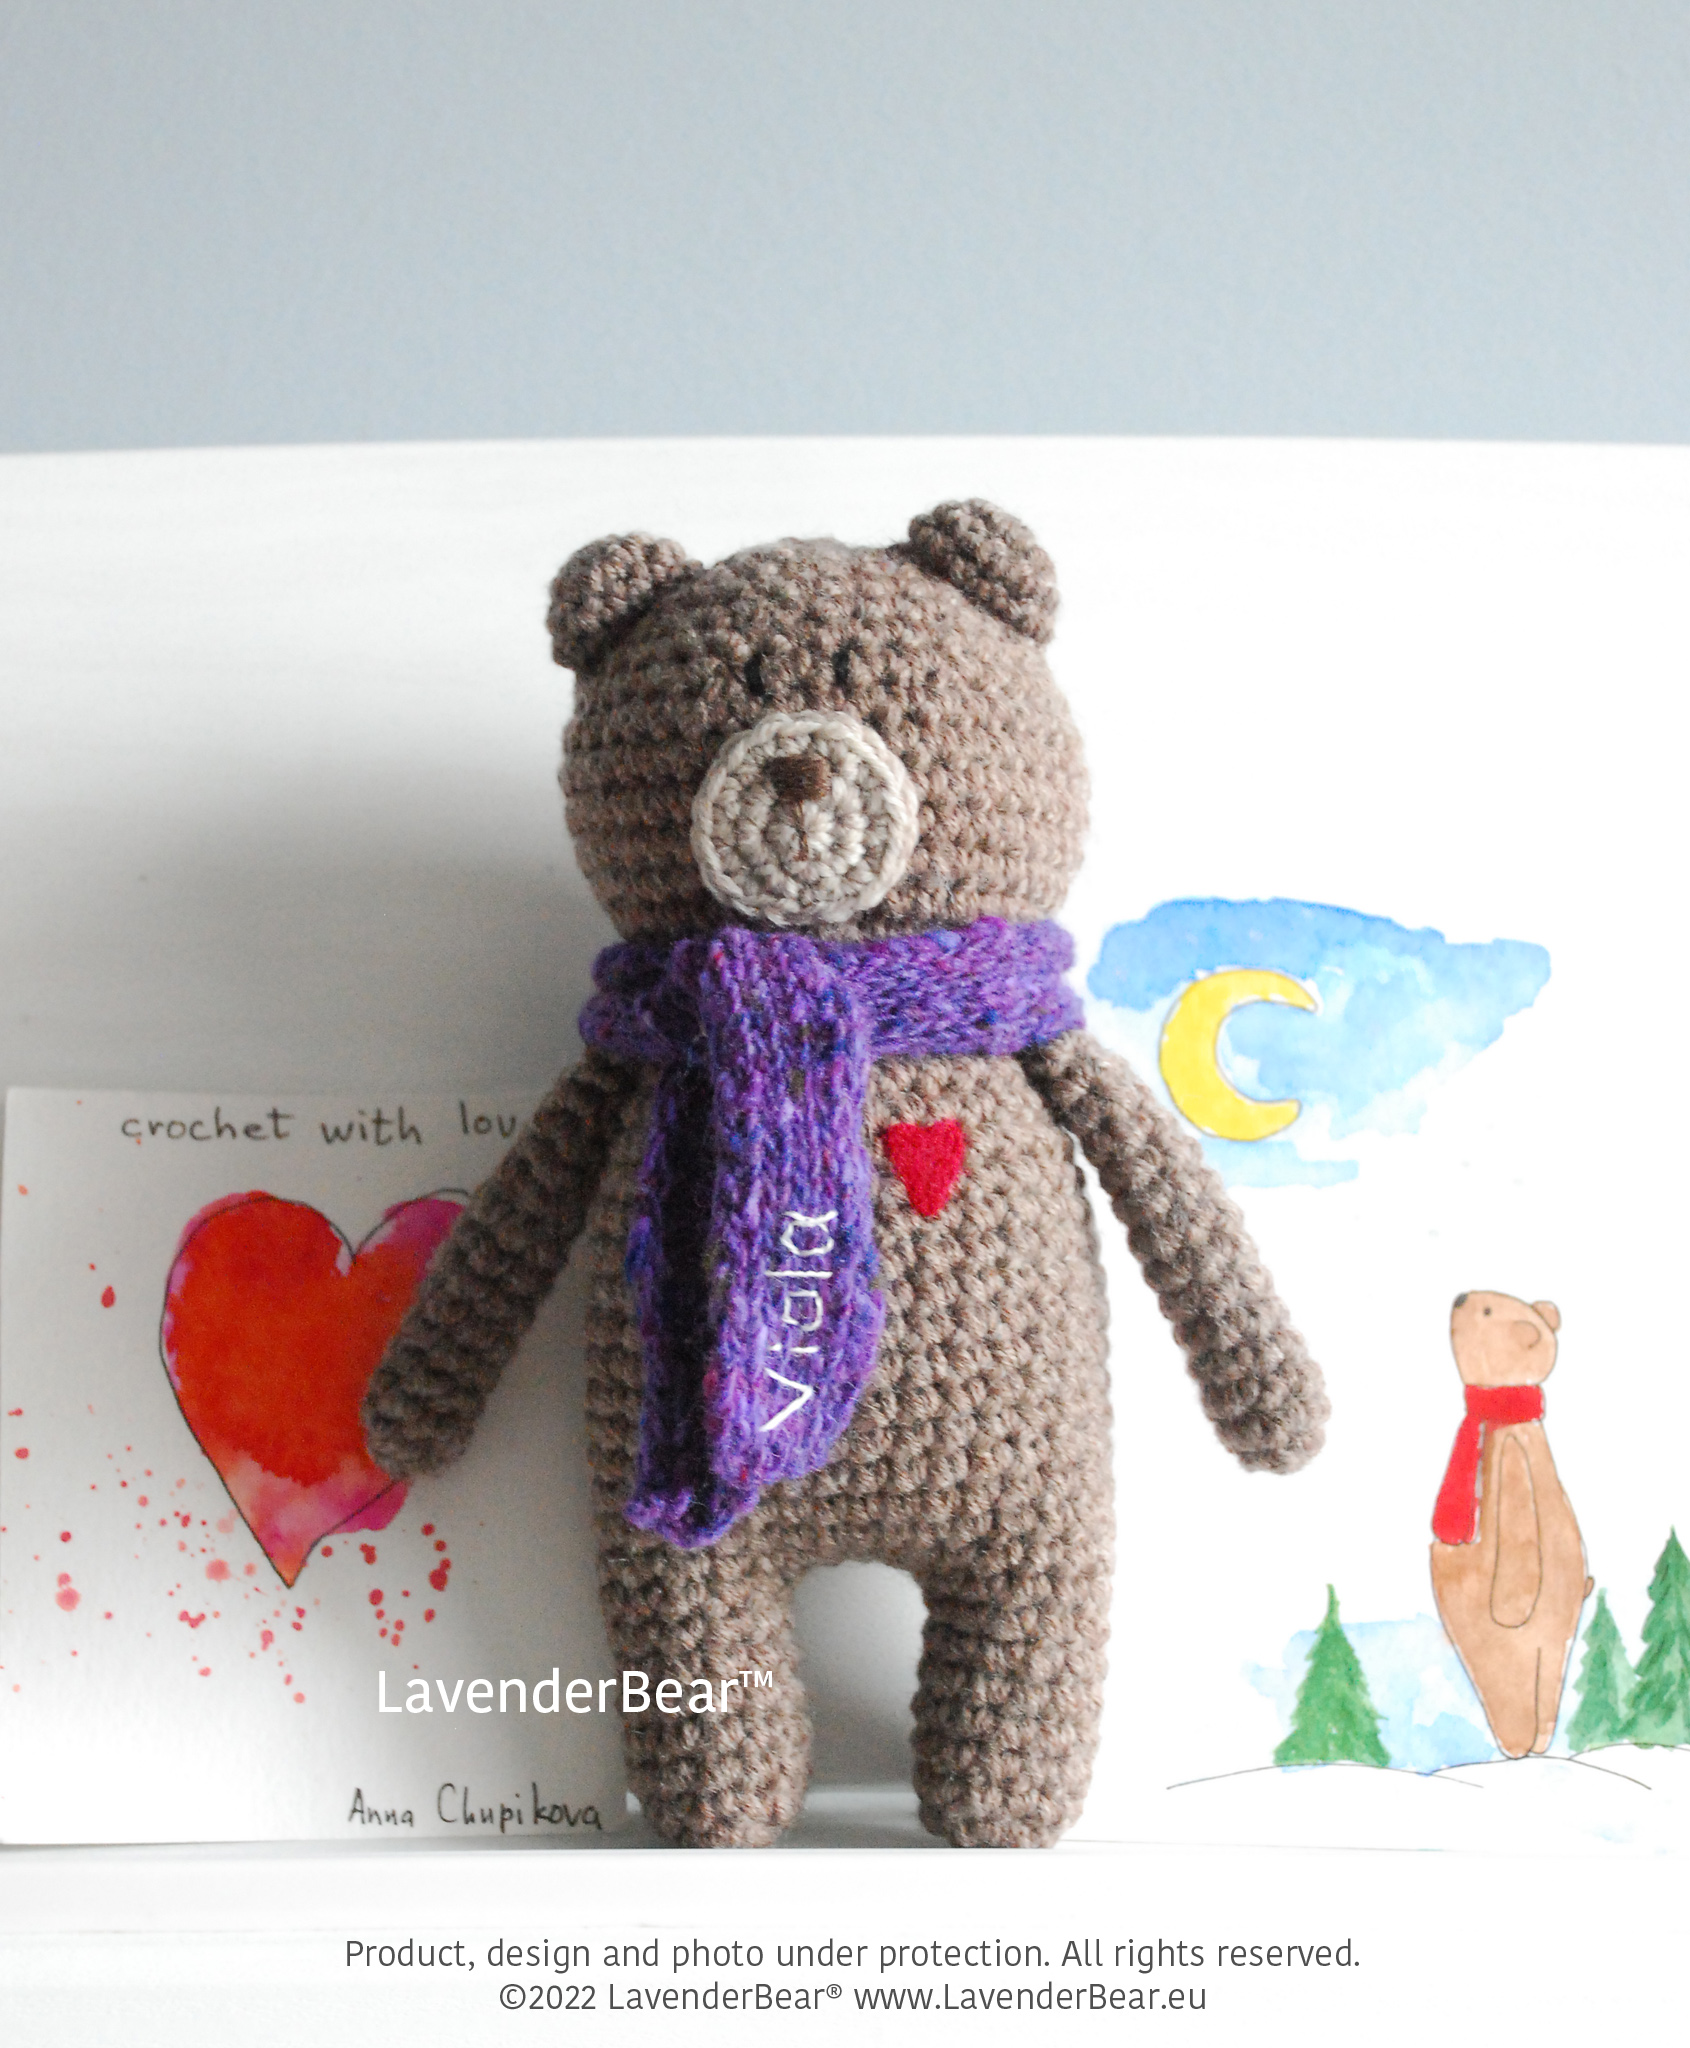 Le Chat Noir Boutique: Carters Bunches of Love Lavender Musical BEAR RATTLE  Baby Lovey Pull TOY, Loveys & More, LoveyCartersBoLLavenderBearPT